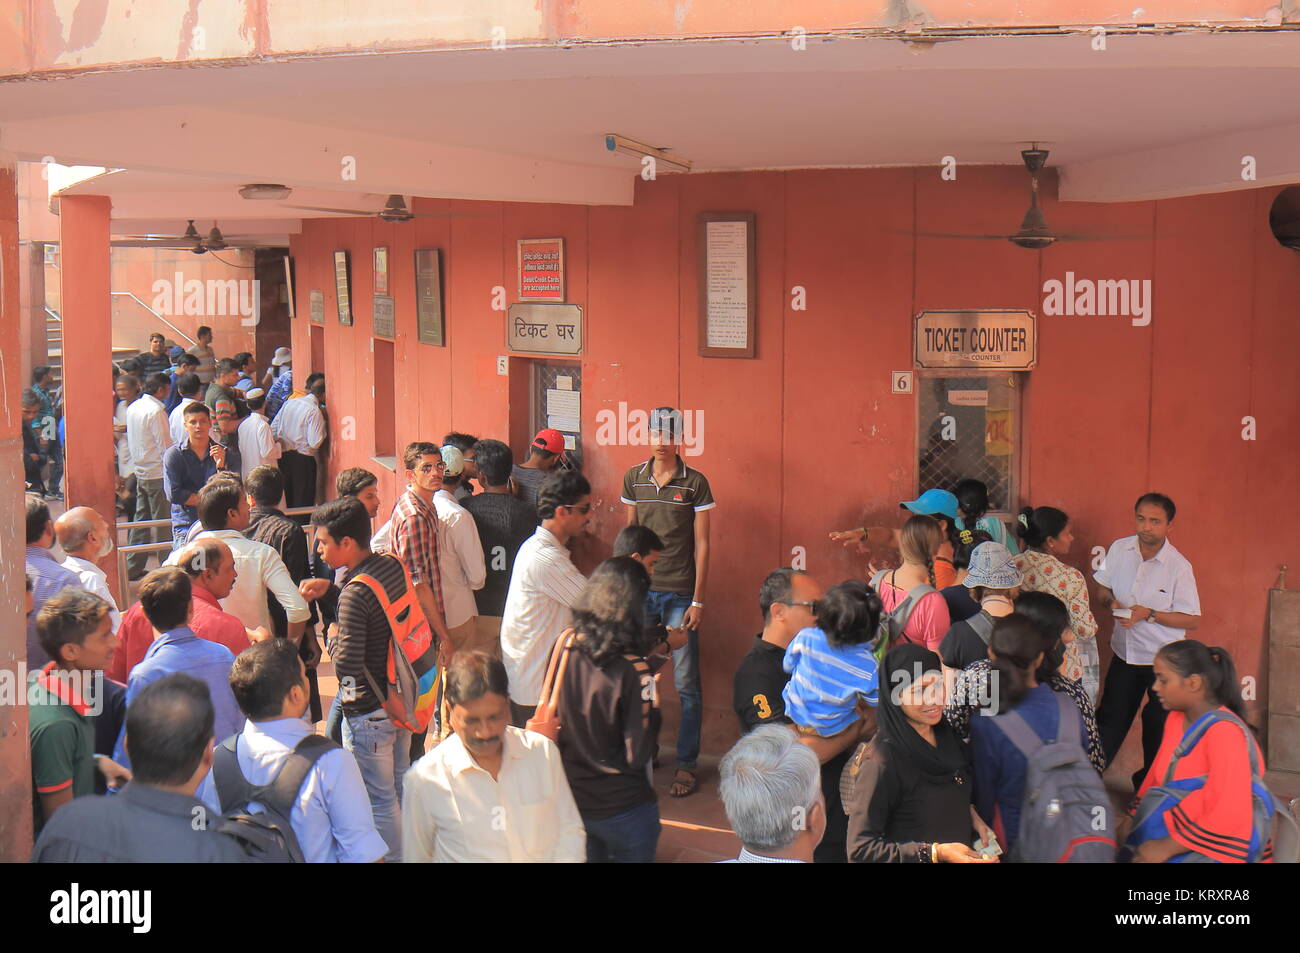 People buy admission for Red fort in New Delhi India. Red fort was main residence of the emperors of the Mughal dynasty for 200 years until 1858 Stock Photo